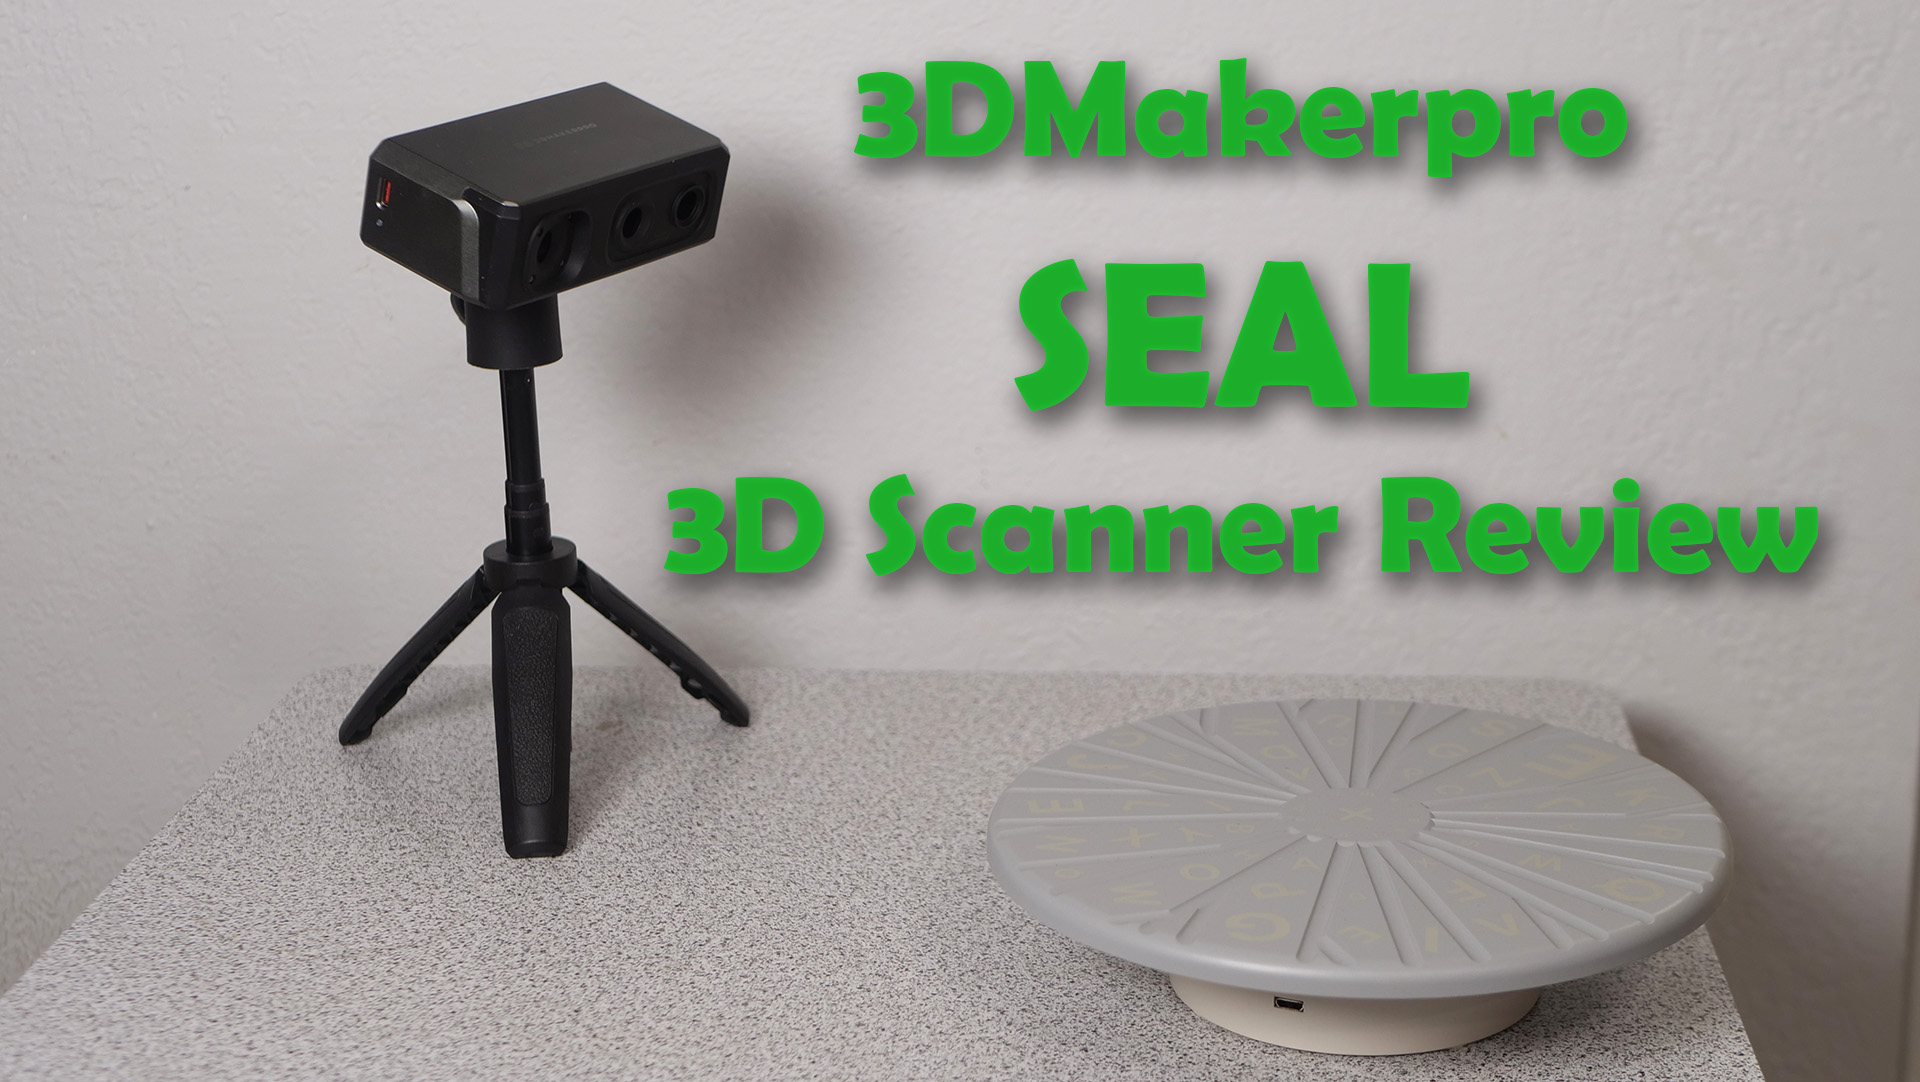 Seal 3D Scanner Review